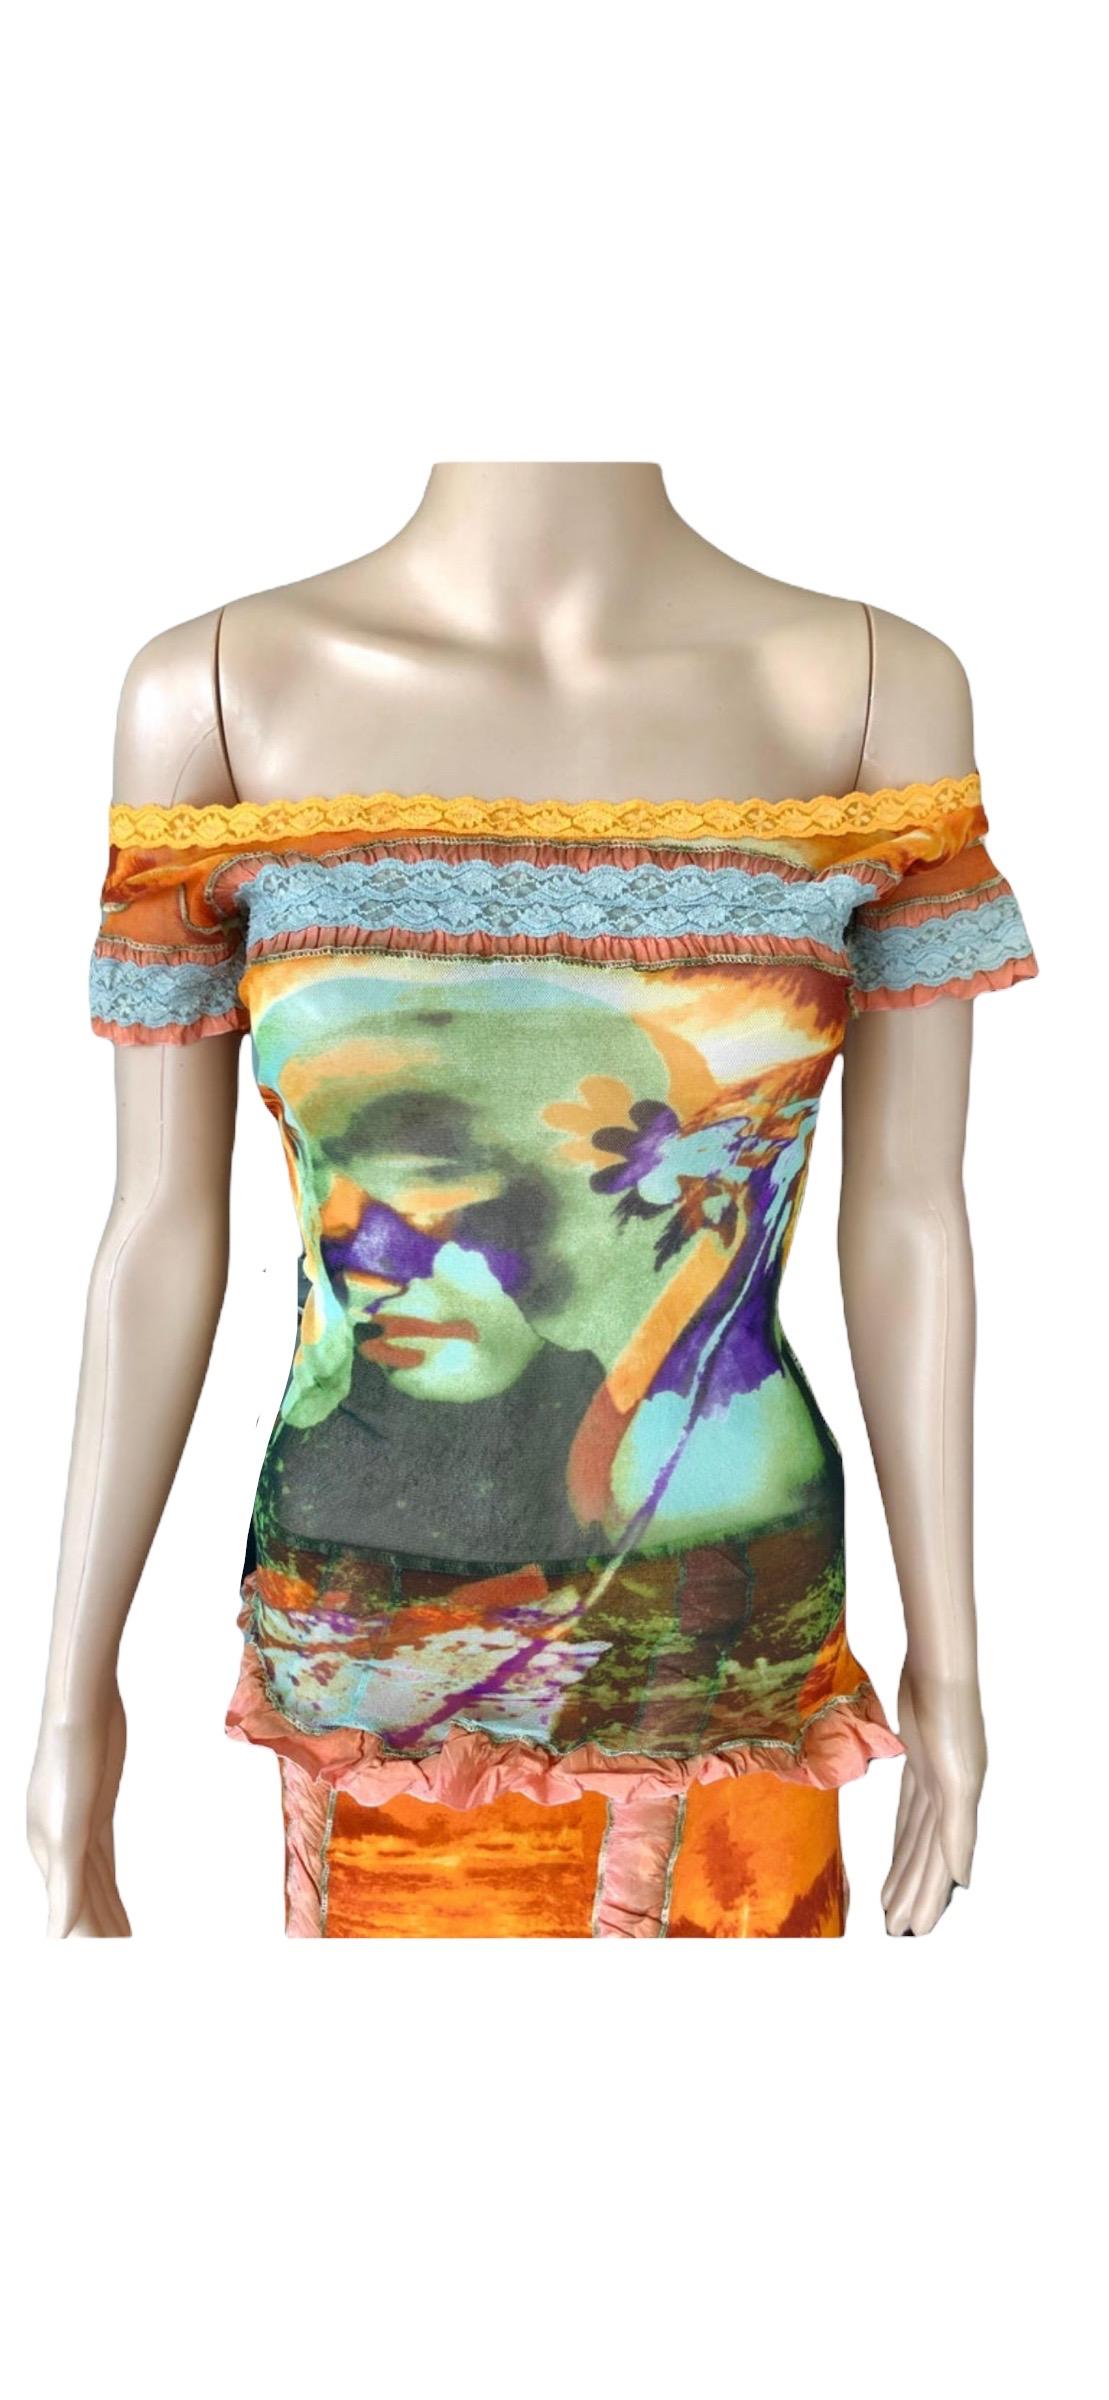 Jean Paul Gaultier S/S 2000 Abstract Psychedelic Top &Skirt Ensemble 2 Piece Set For Sale 10